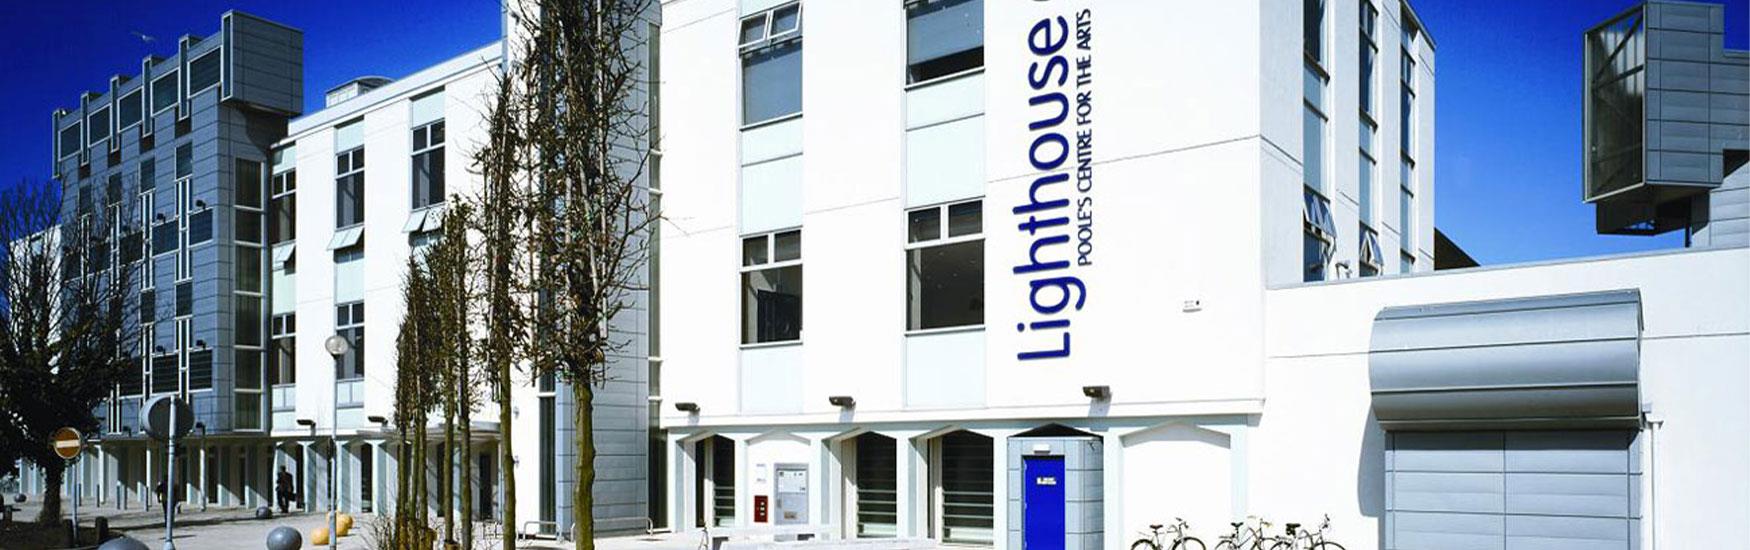 Exterior shot of the Poole lighthouse theatre illuminated by the sun